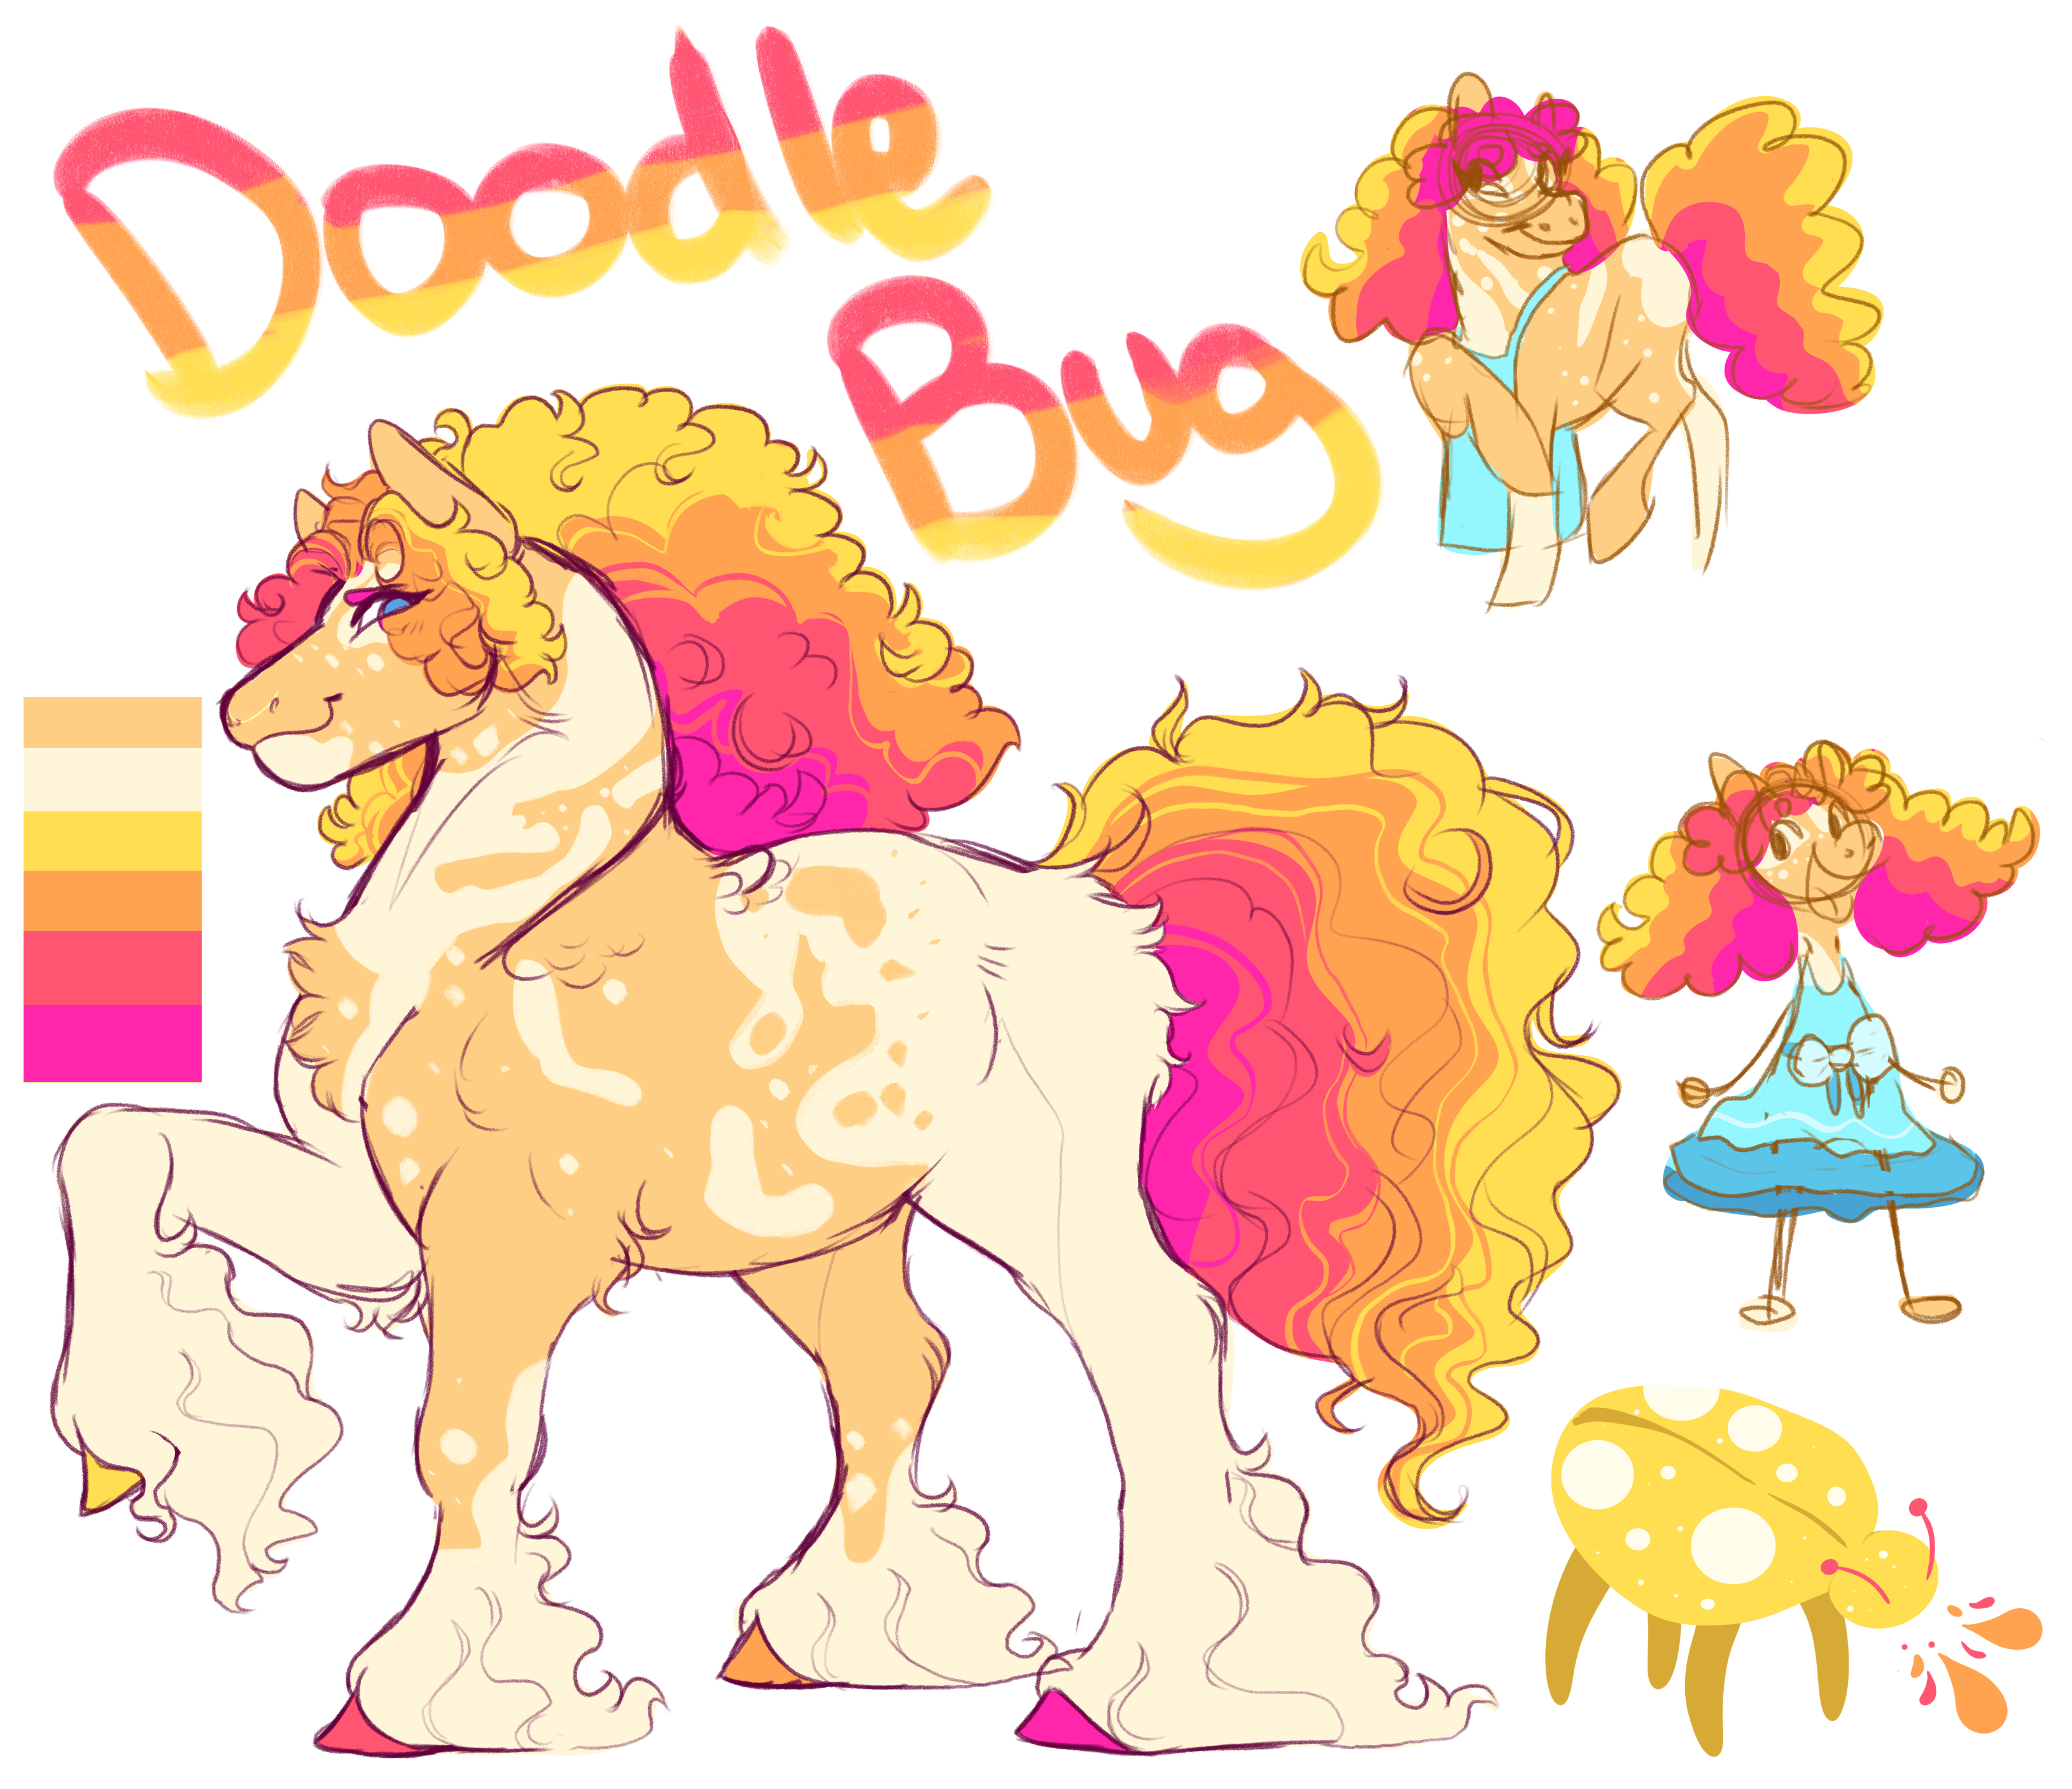 What the Hell is a Doodlebug?